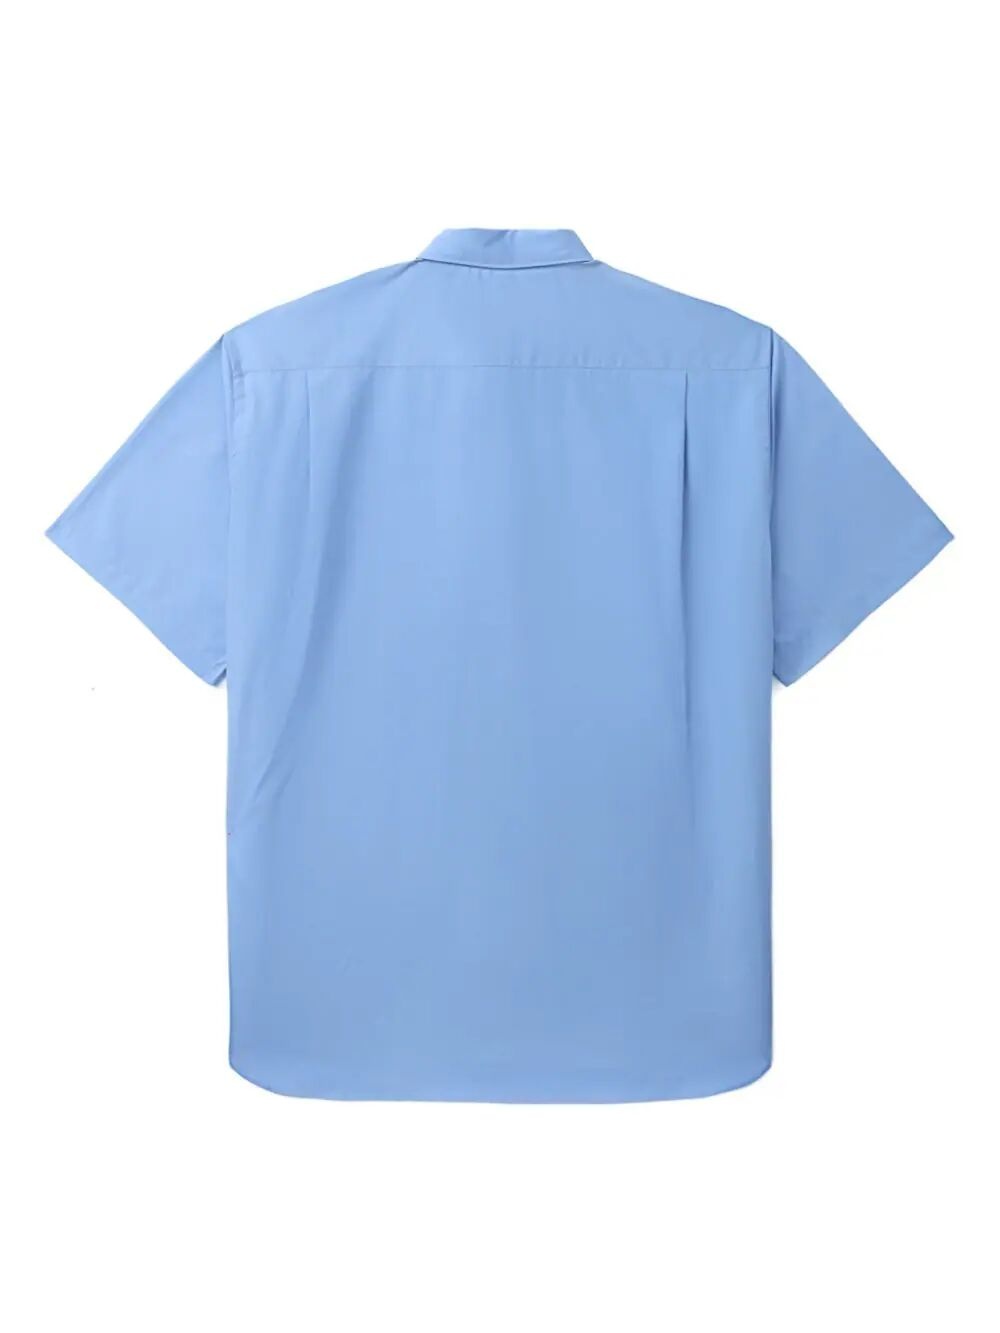 ICONIC COTTON SHIRT WITH LOGO - 8